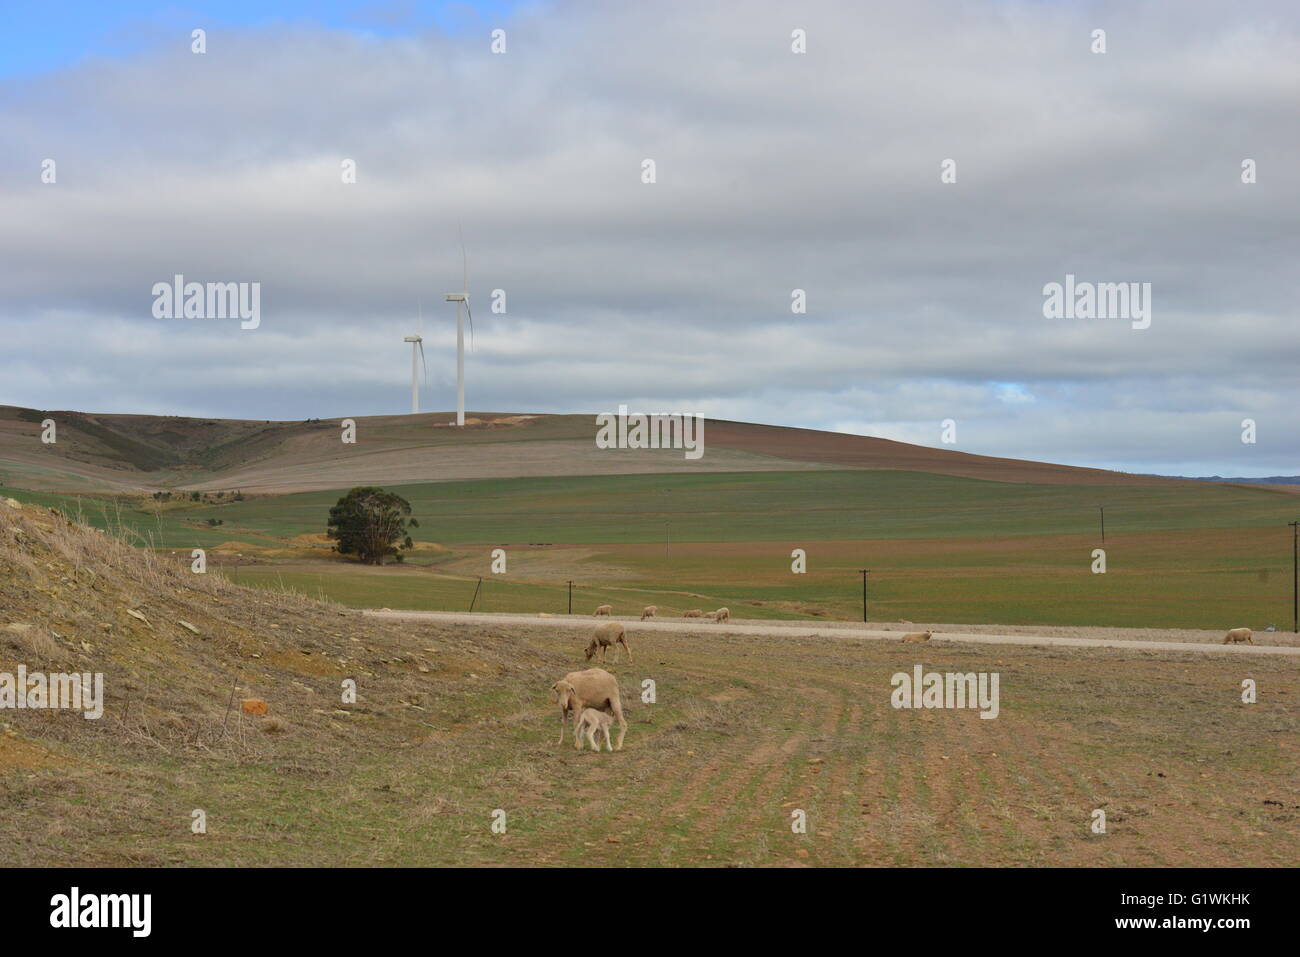 Wind turbines on farmland in South Africa Stock Photo